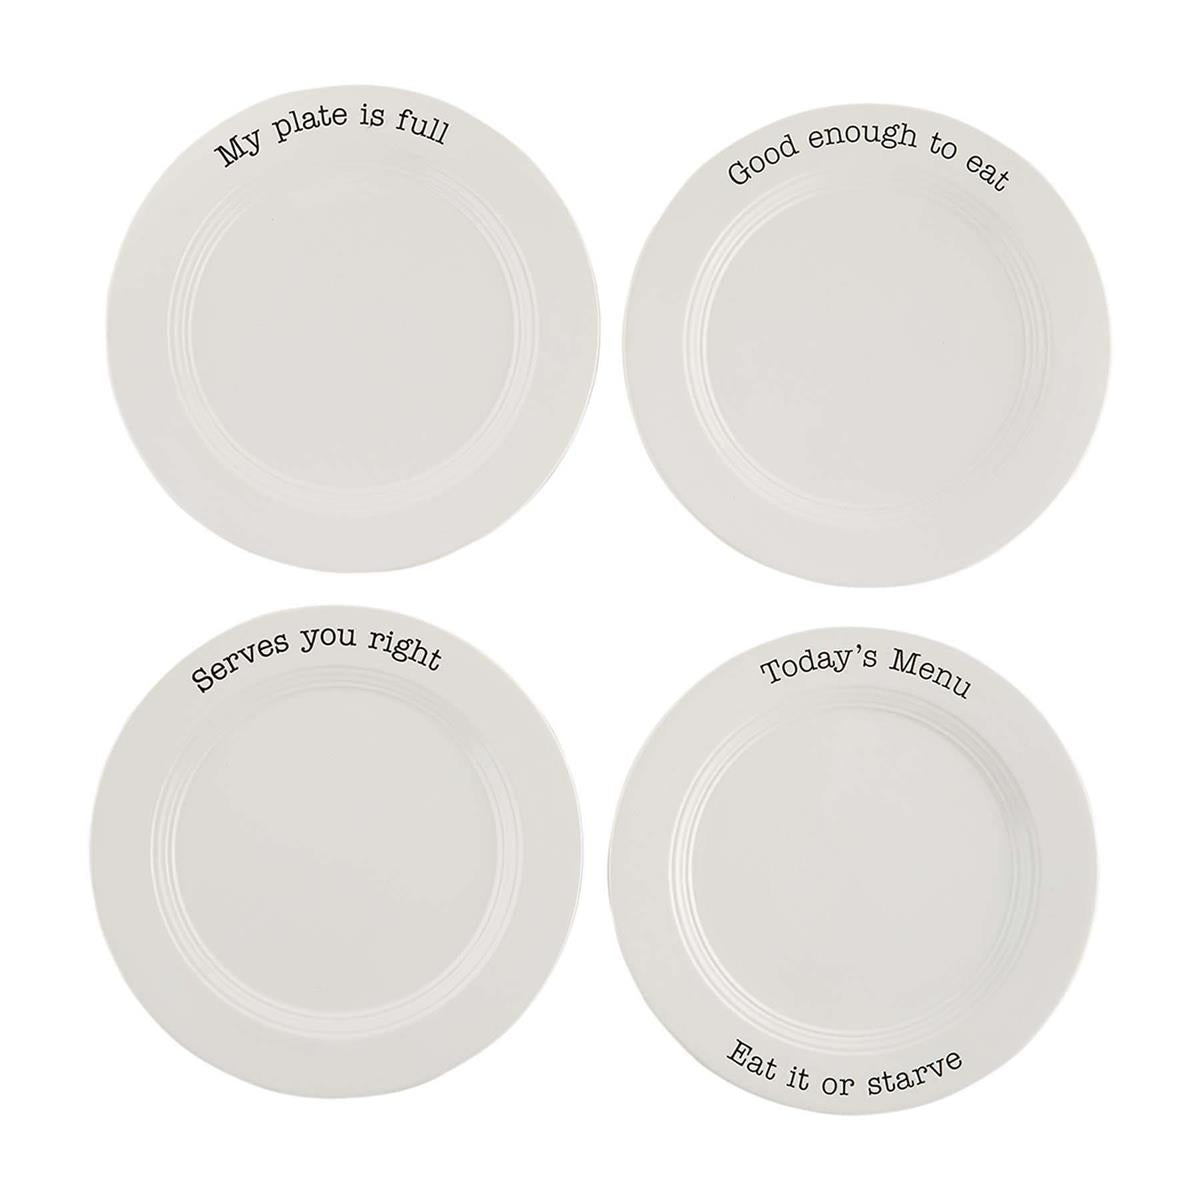 MUDPIE TABLE FOR 4 DINNER PLATE SET